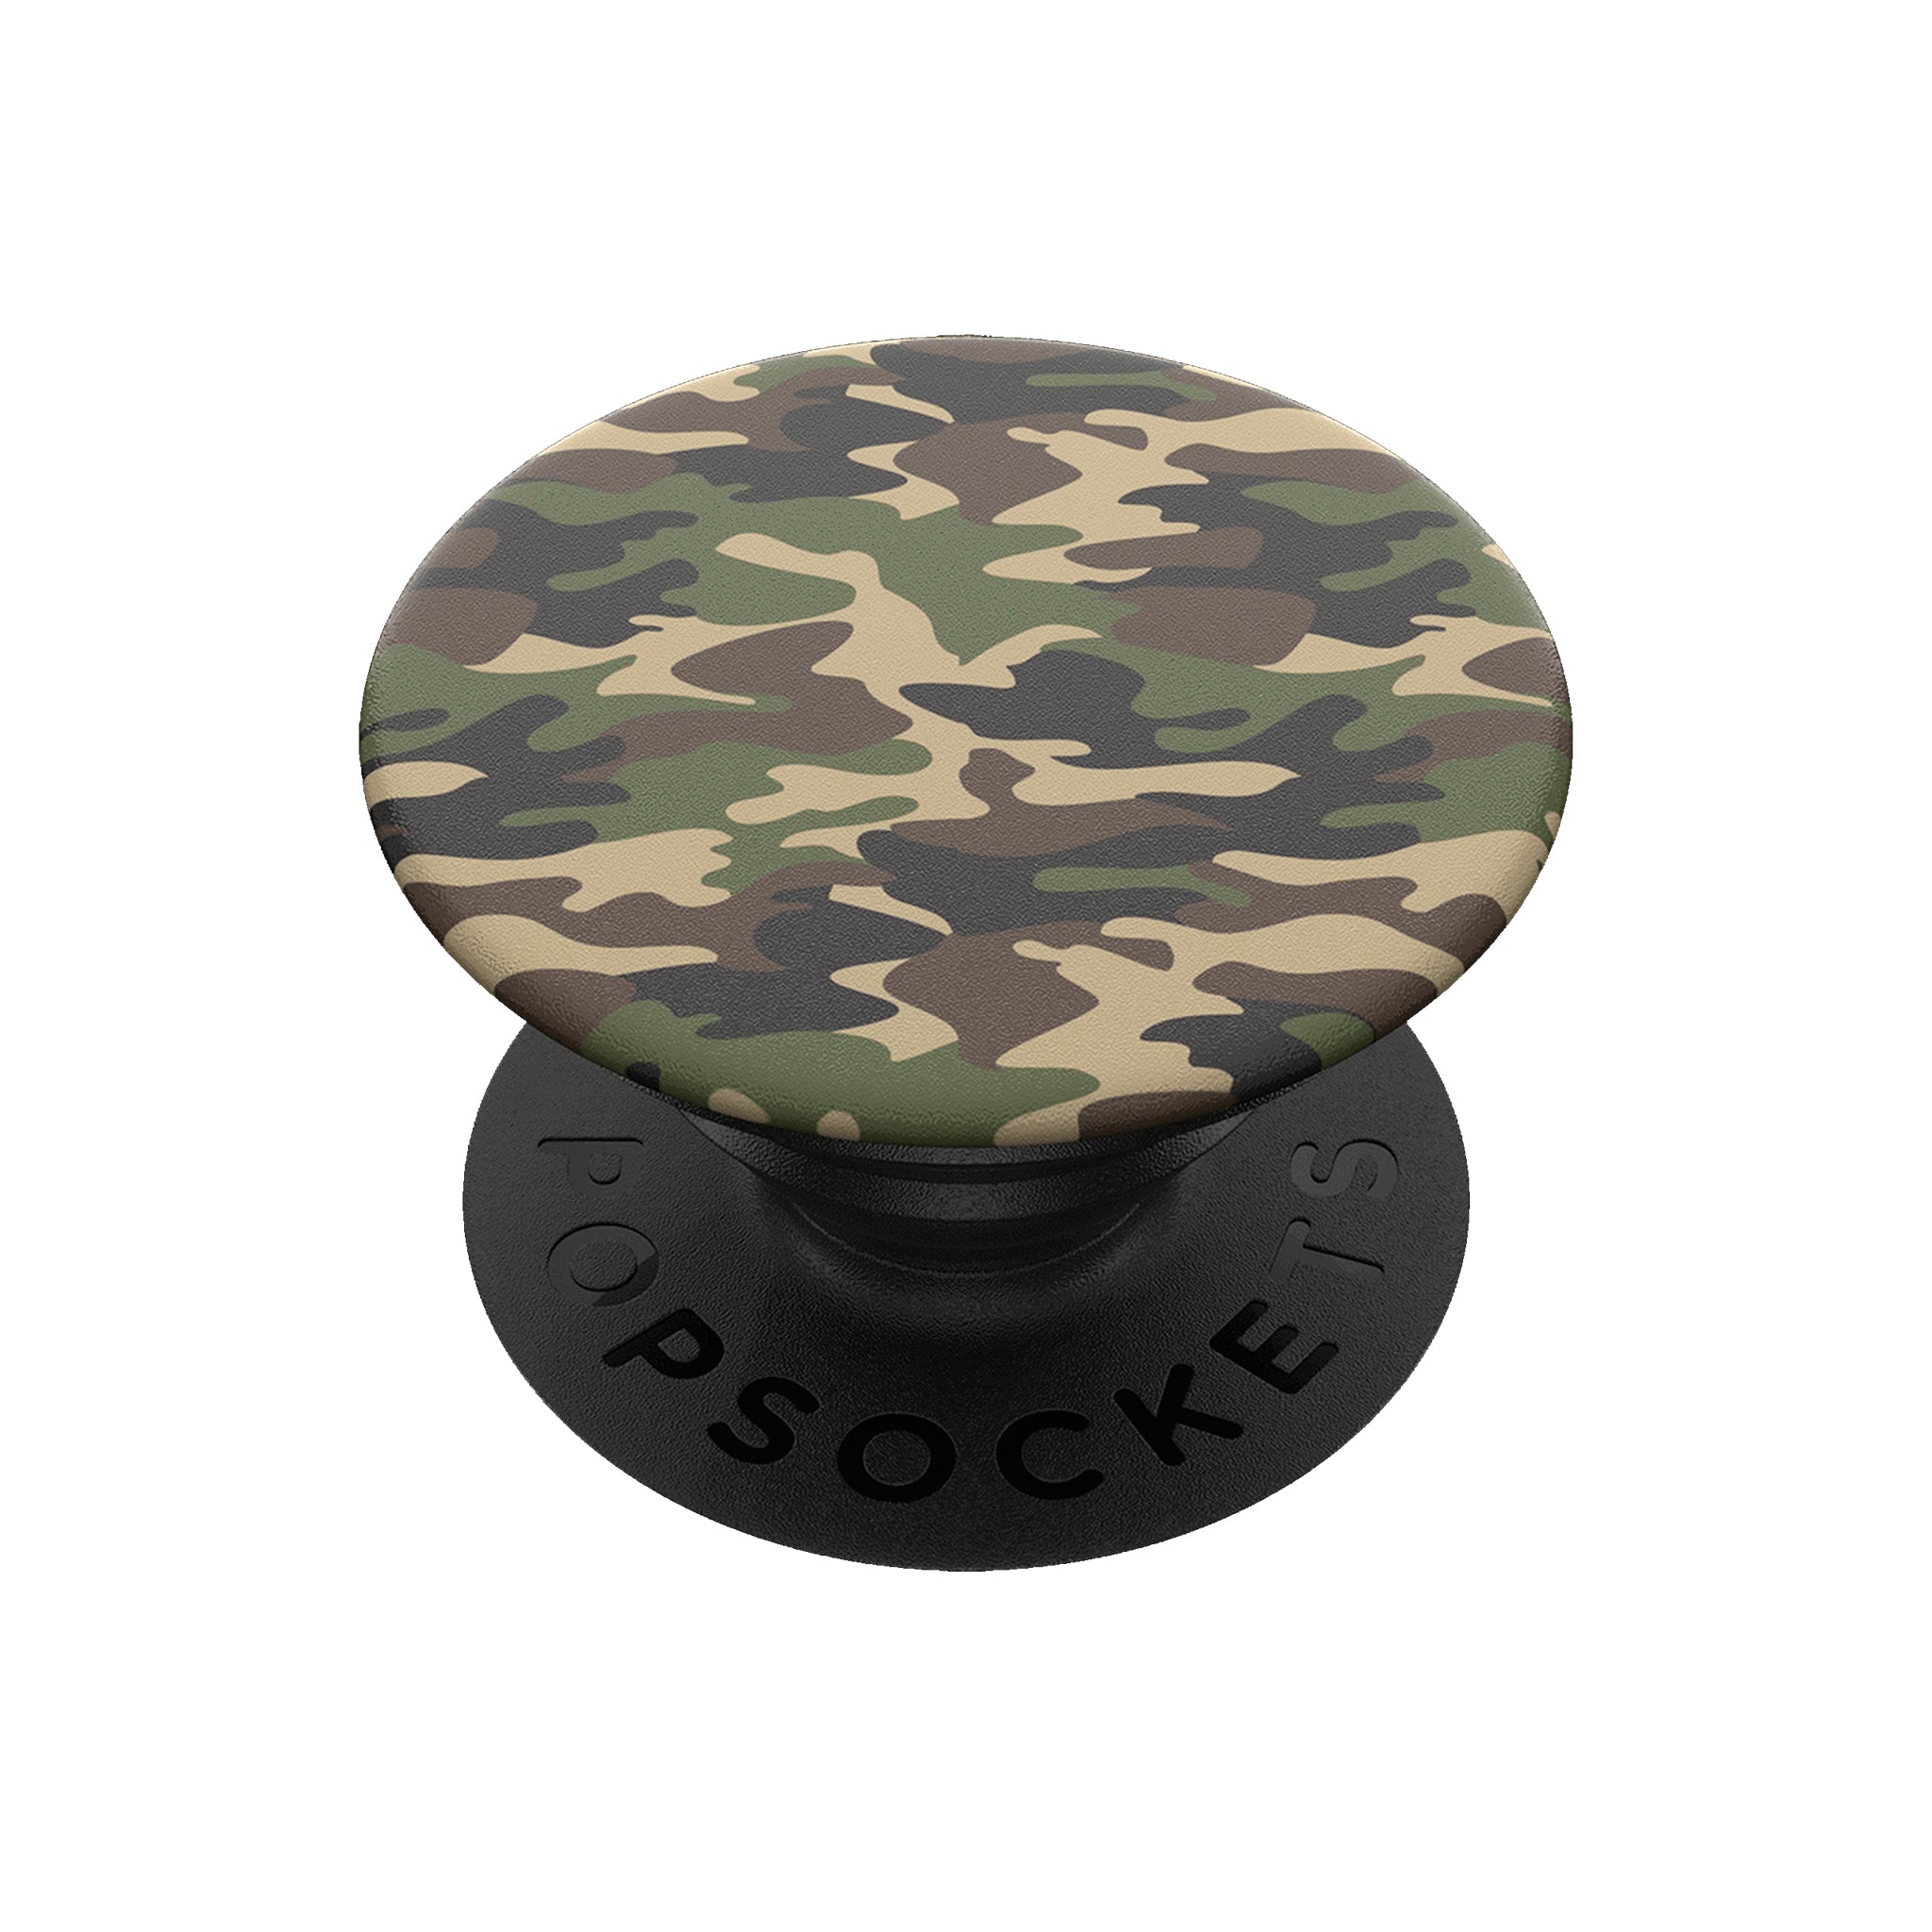 Popsockets - Popgrip Patterns Swappable Device Stand And Grip - Woodland Camo